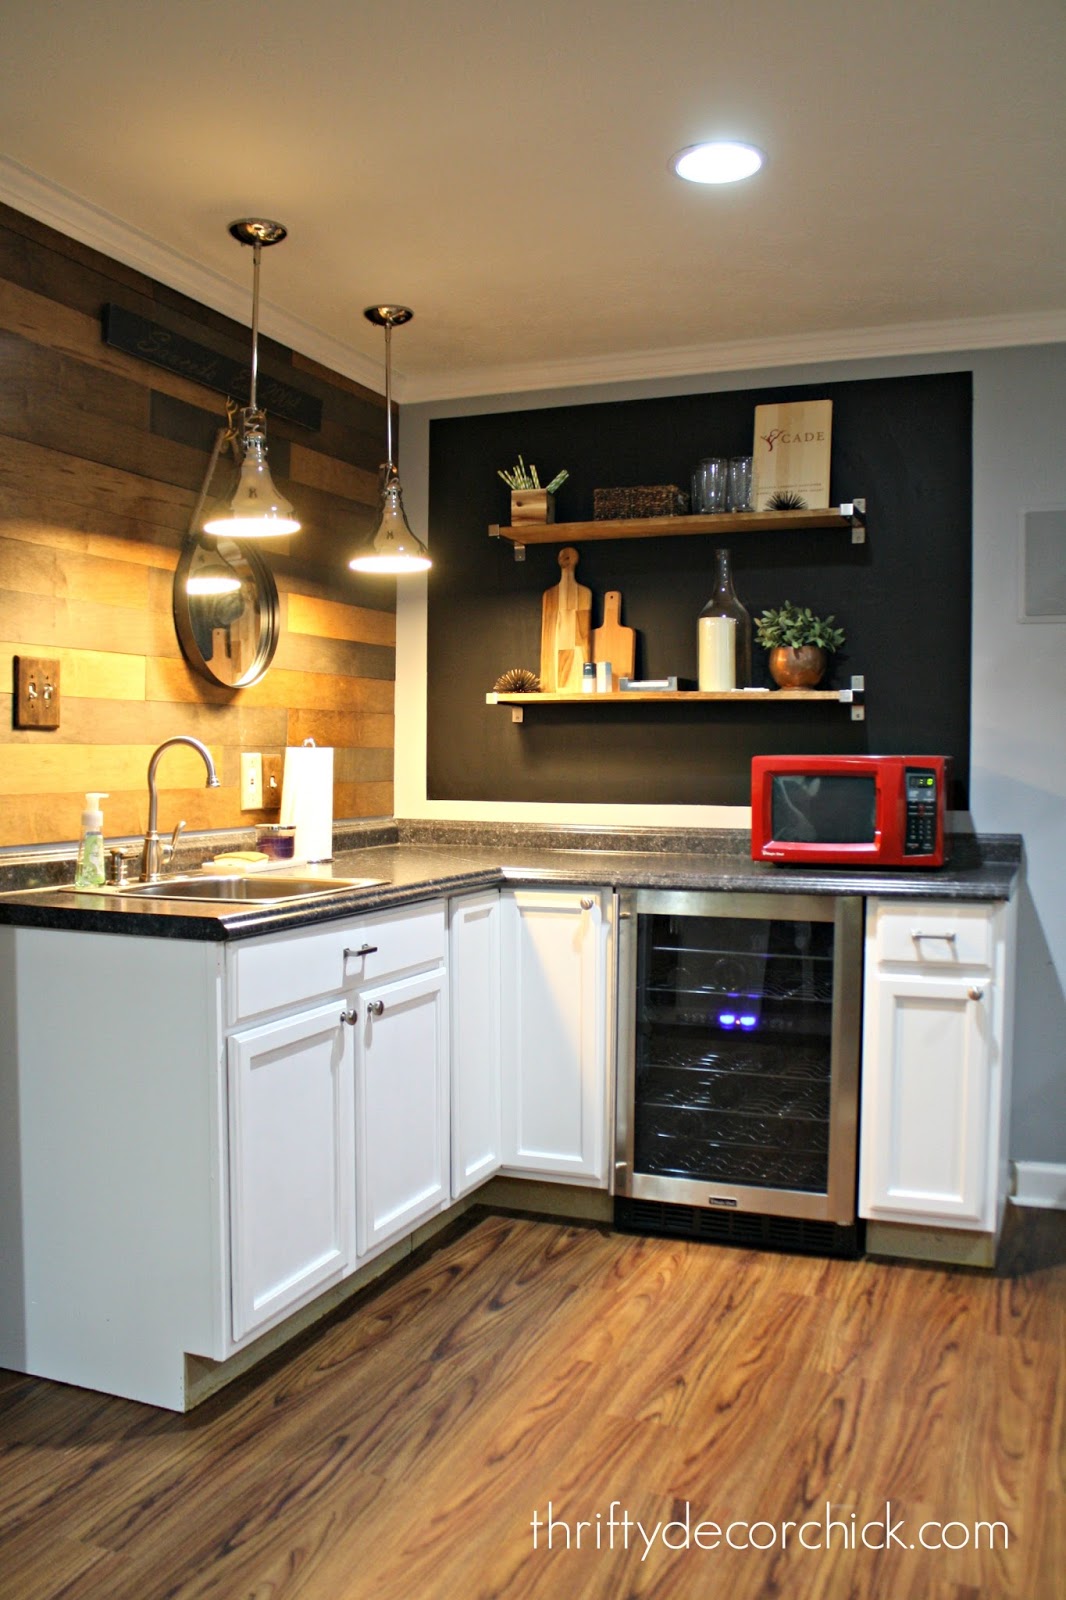 Our Moody DIY Basement Kitchenette REVEAL!, Thrifty Decor Chick